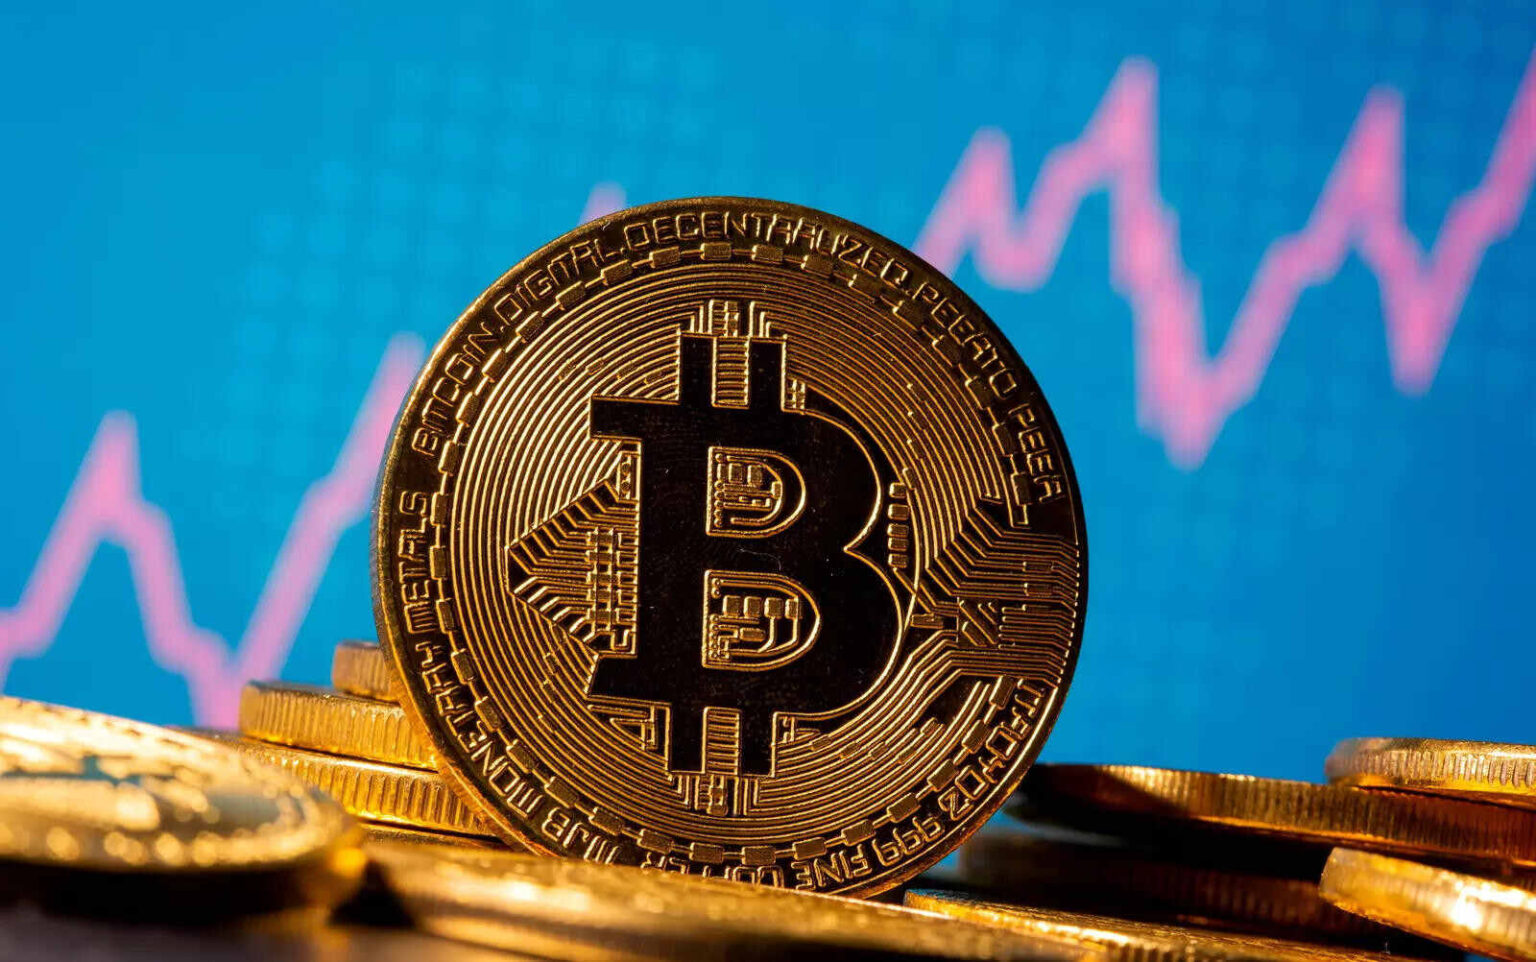 The Bitcoin market is certainly a roller coaster, so it can be intimidating for first-time investors. Start learning about the market now.